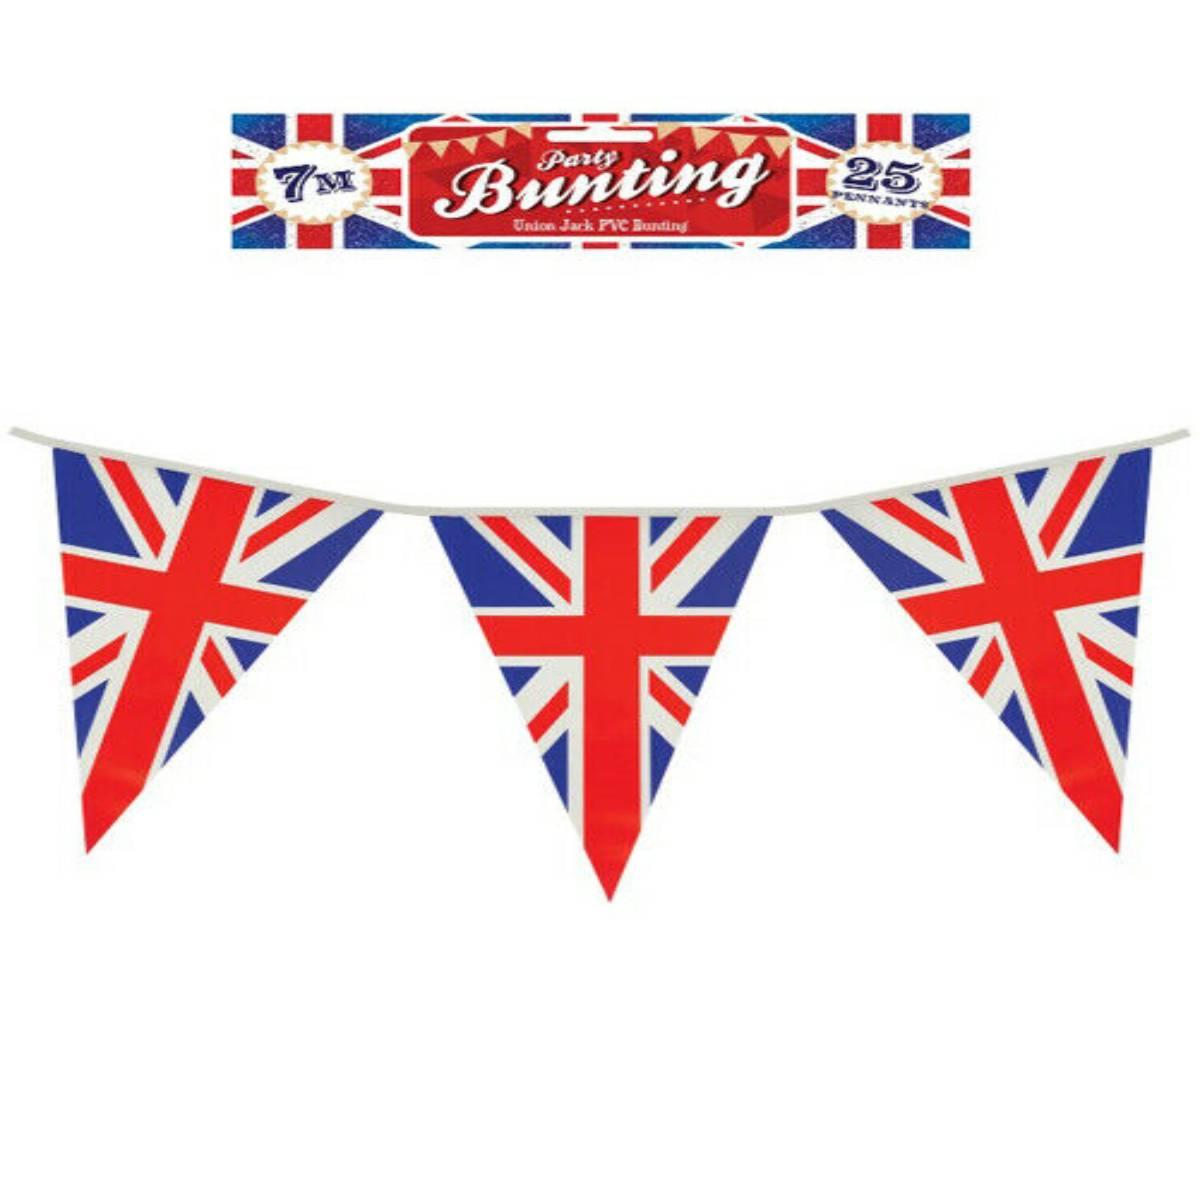 7m Pennant Union Jack Bunting with 25 Flags by Henbrandt F63003 available here at Karnival Costumes online party shop